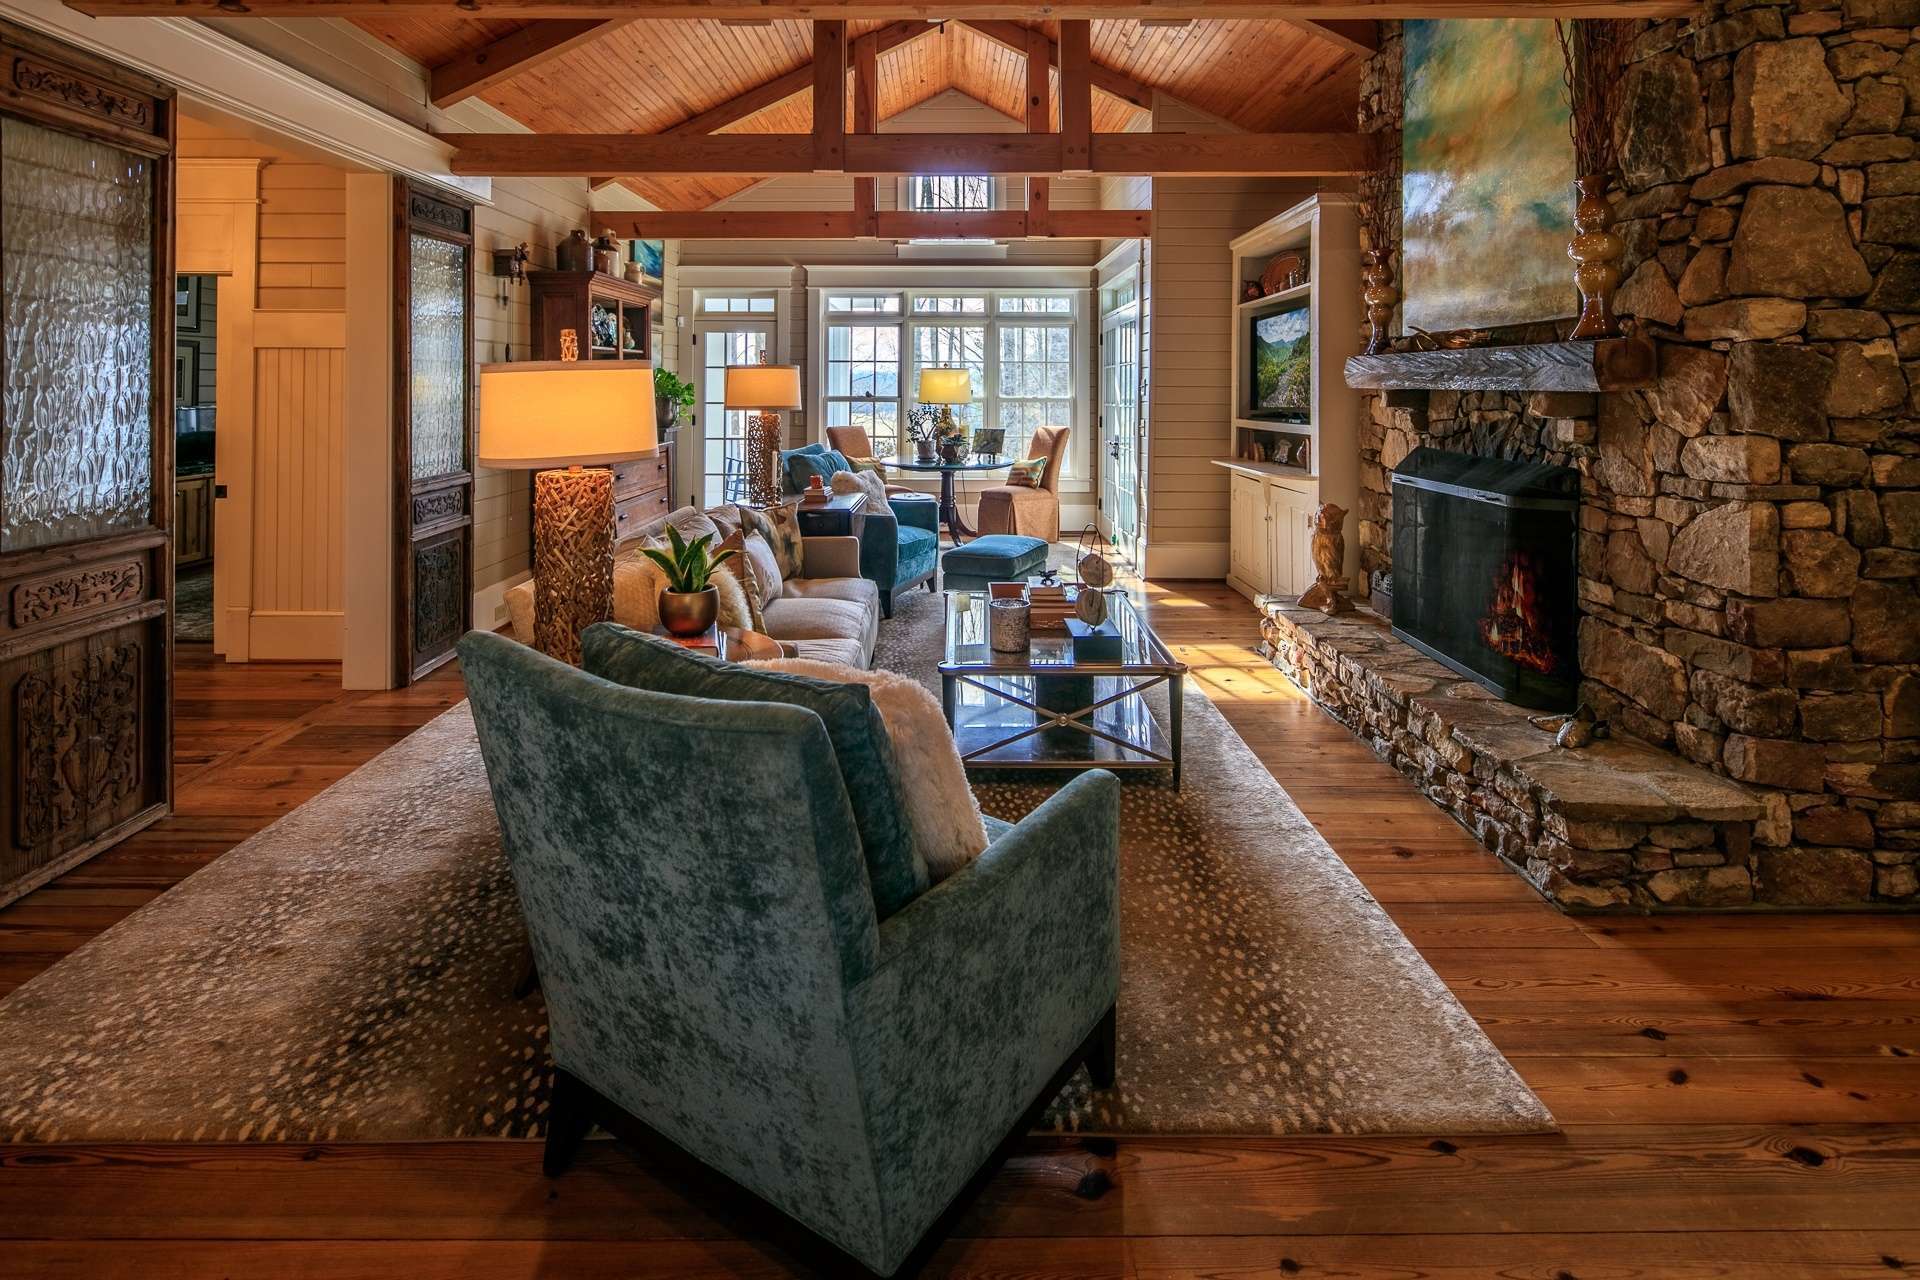 The native stone fireplace with gas logs adds warmth on cool winter evenings while the reclaimed wood flooring and heirloom doors enhance the farmhouse styling and custom appointments.